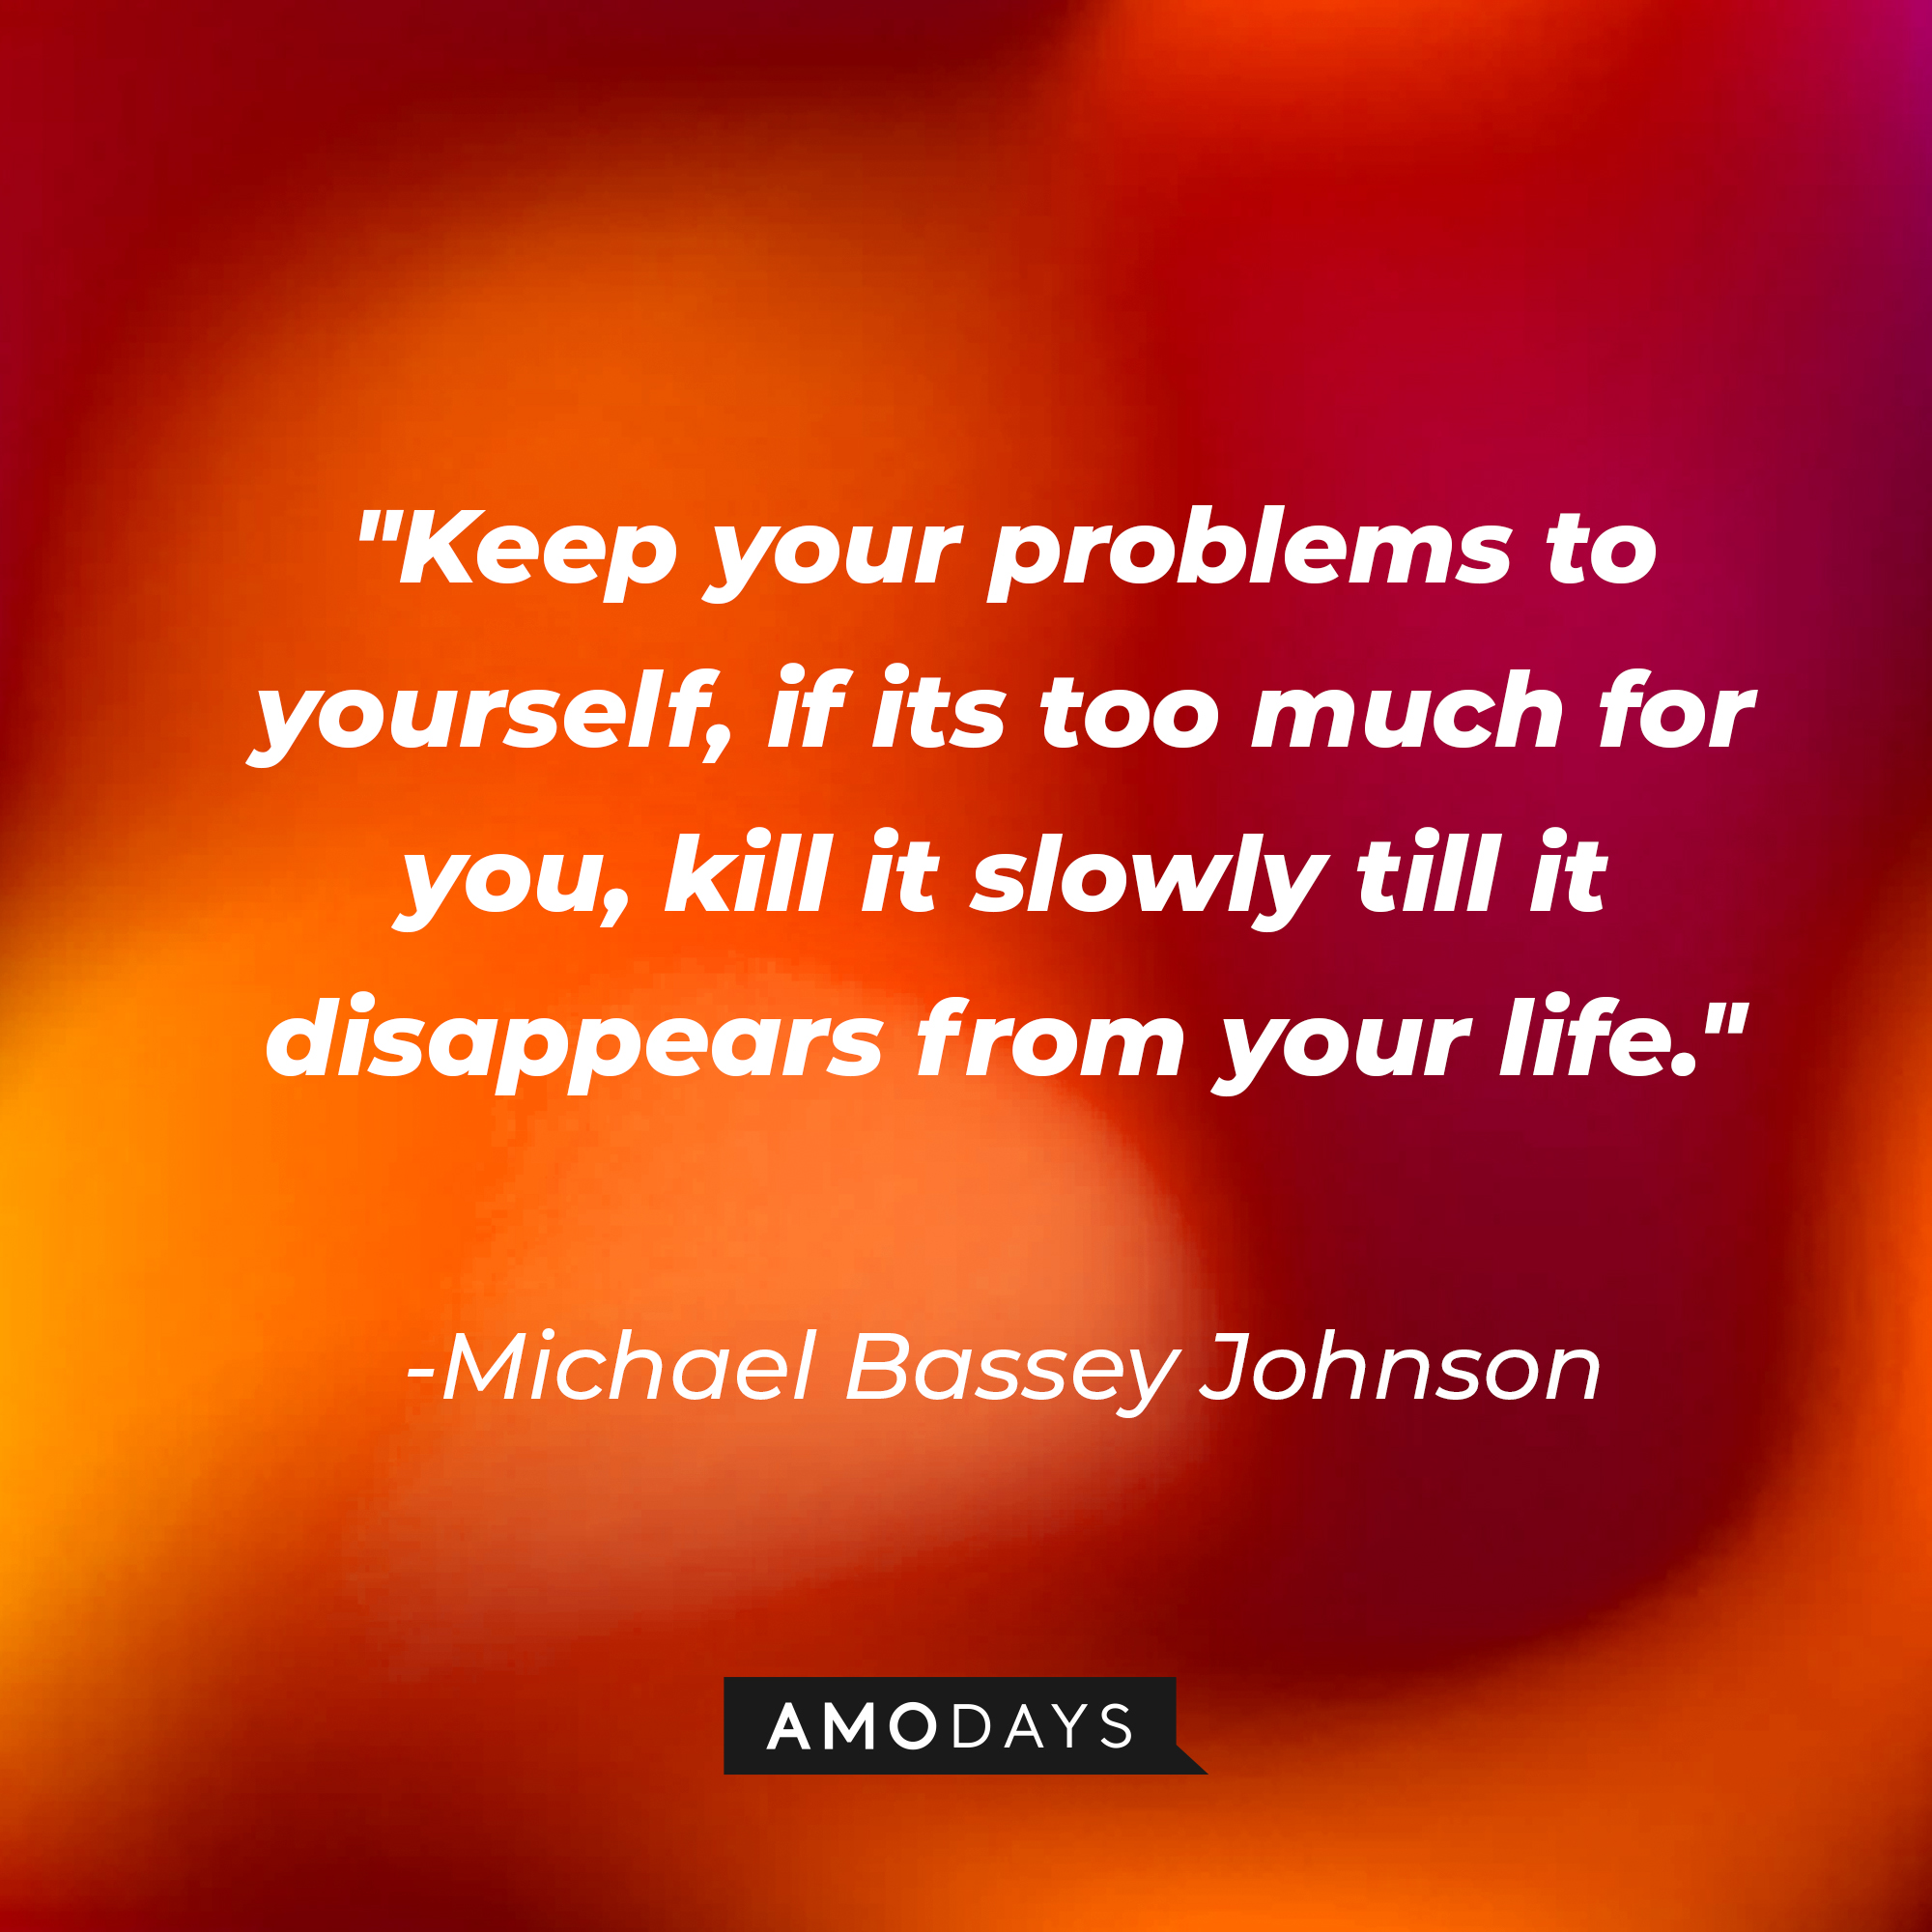 Michael Bassey Johnson's quote: "Keep your problems to yourself, if its too much for you, kill it slowly till it disappears from your life." | Image: AmoDays